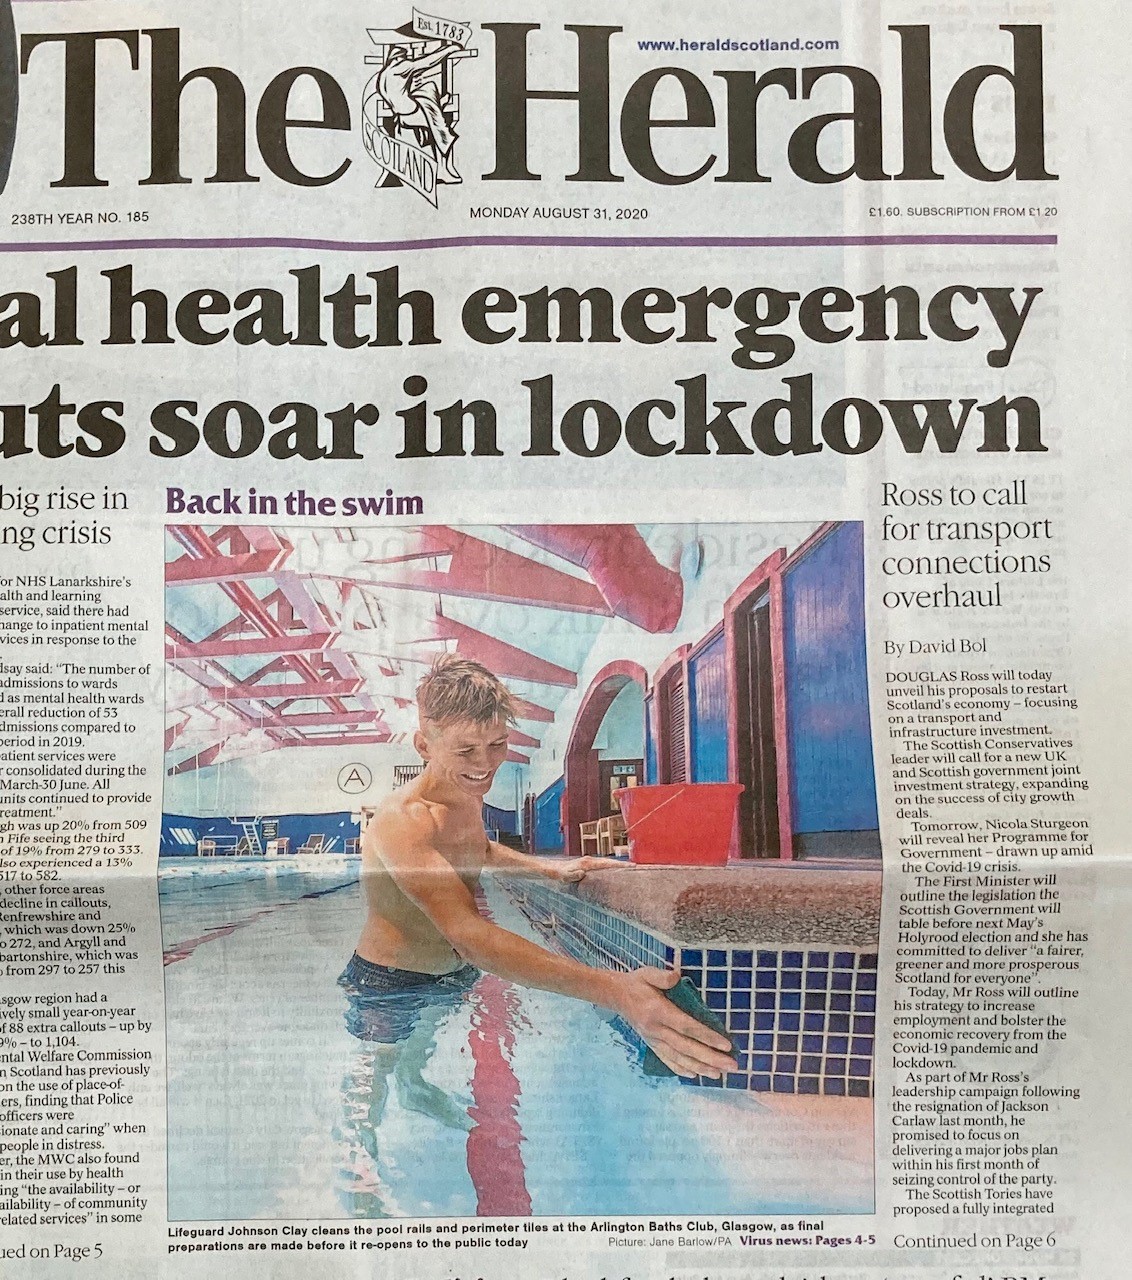 herald front page